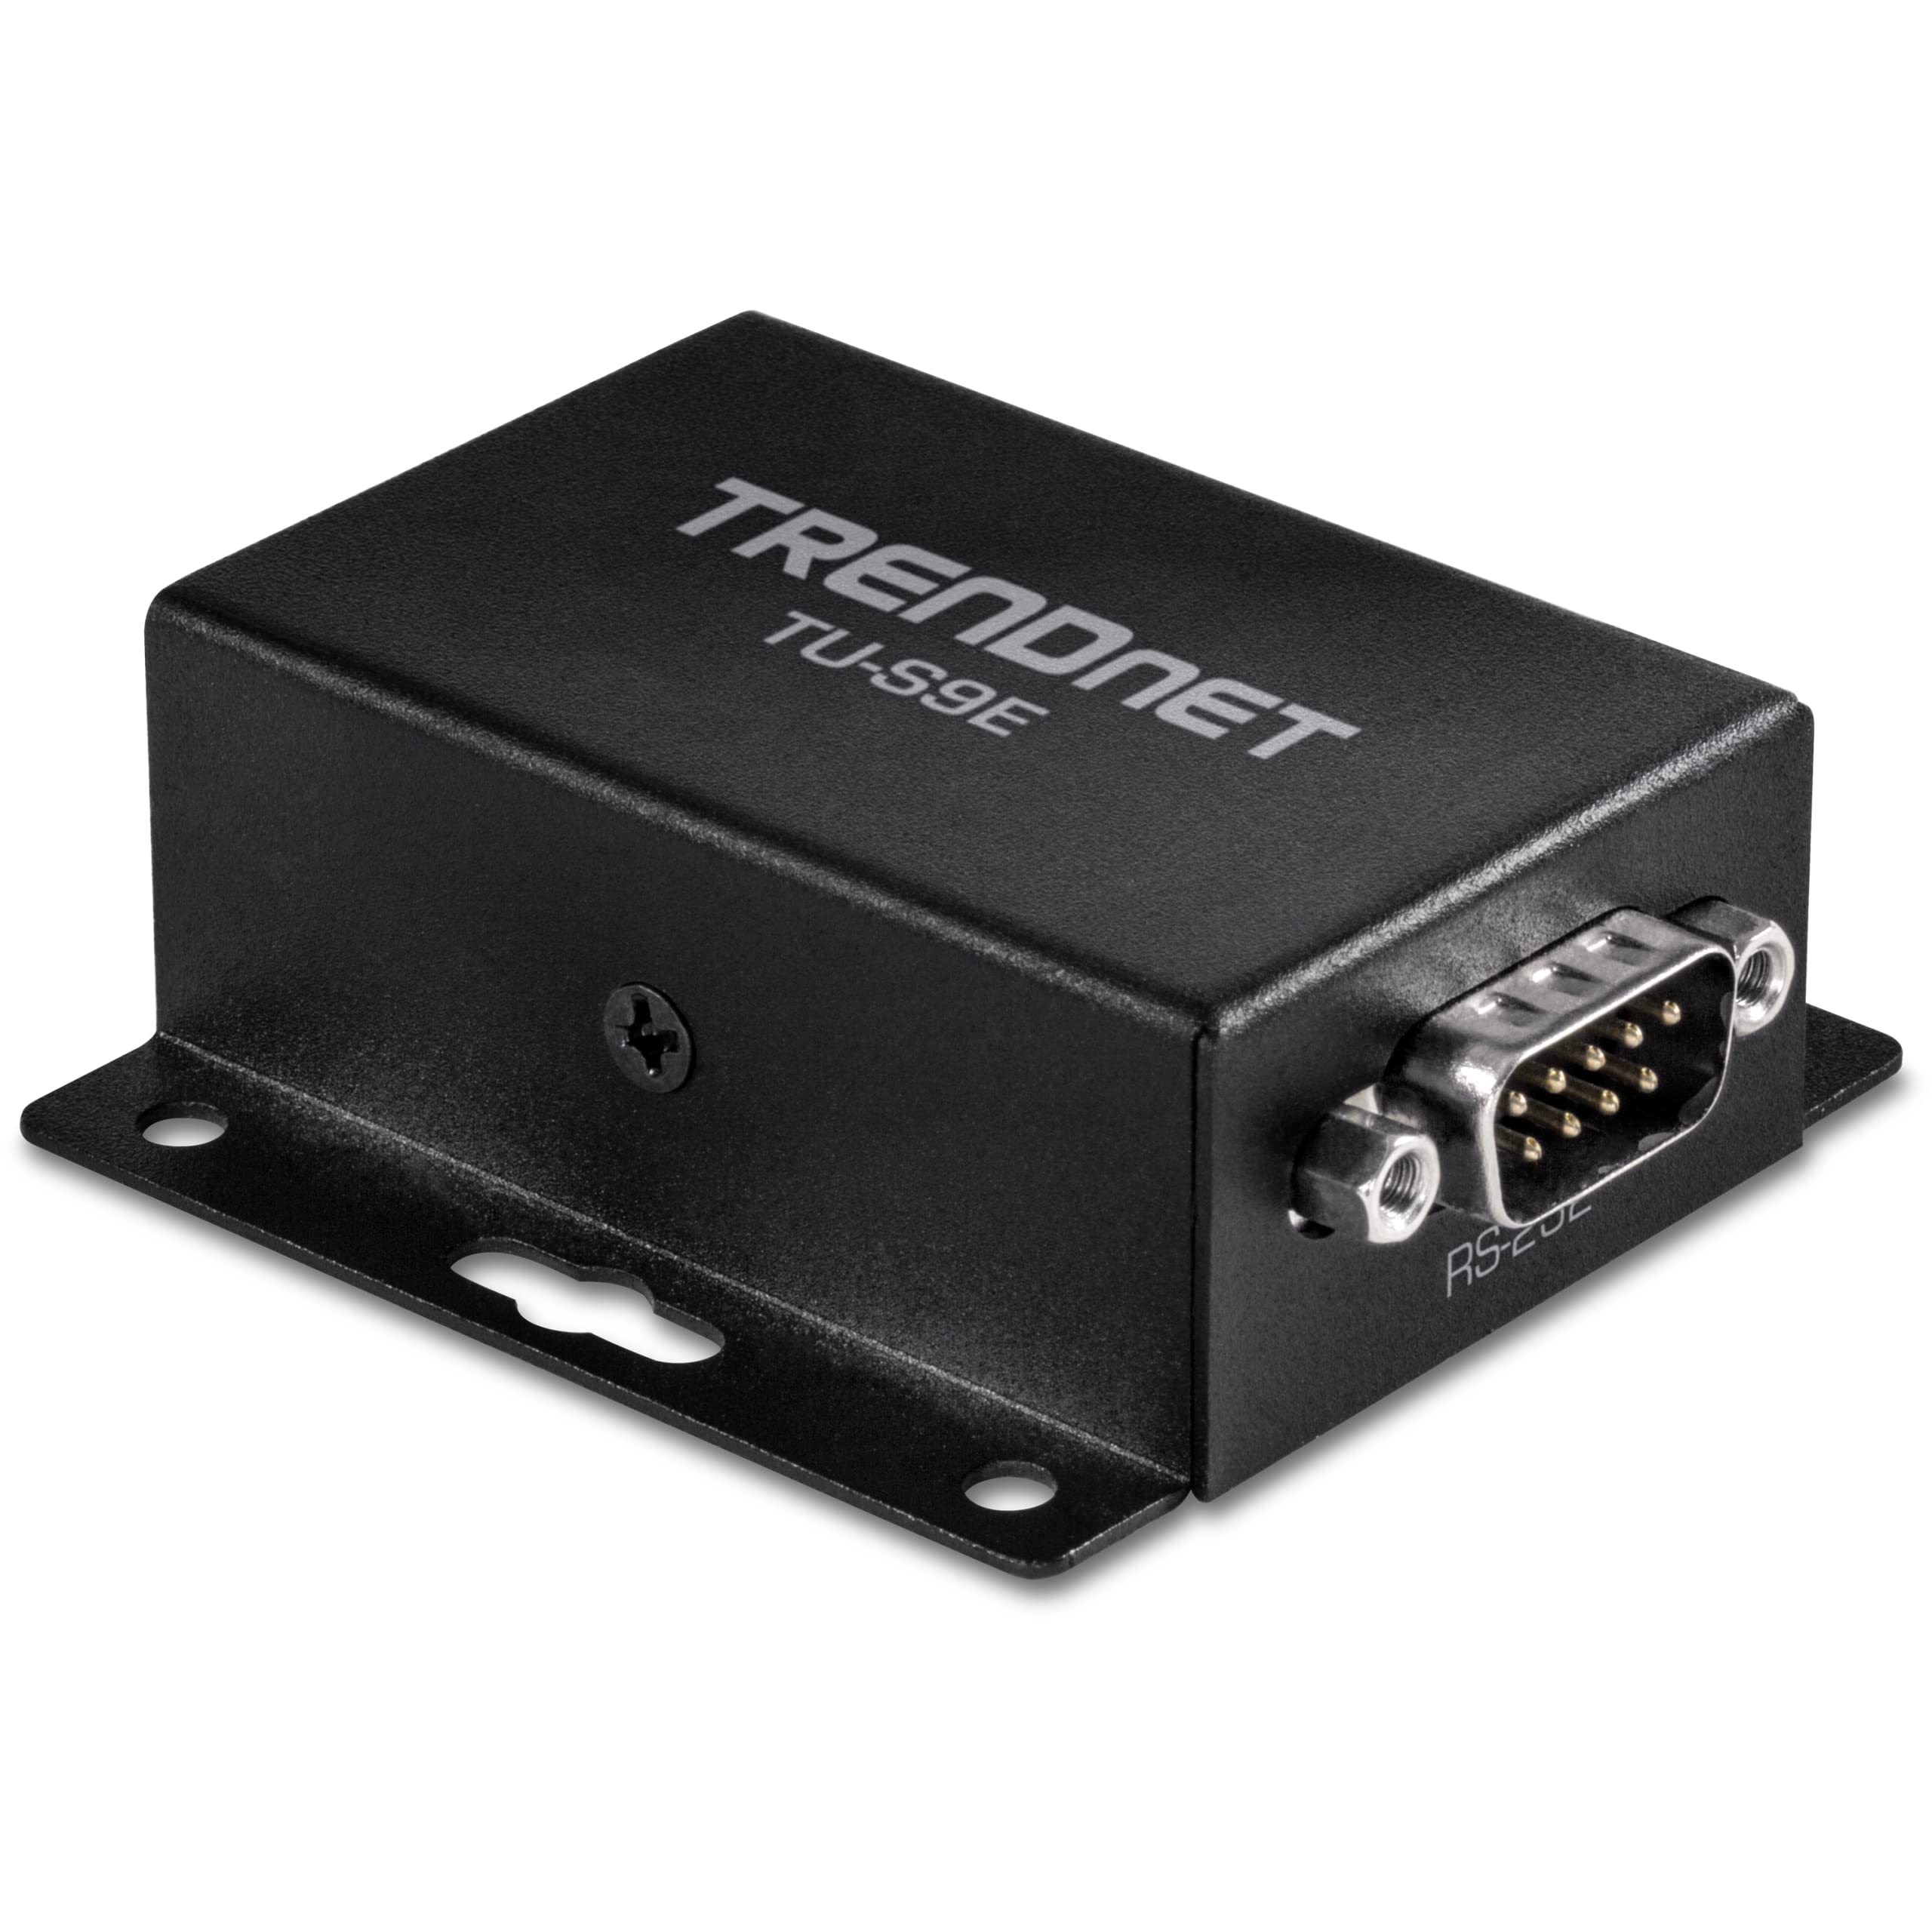 1-PORT SERIAL TO IP ETHERNET